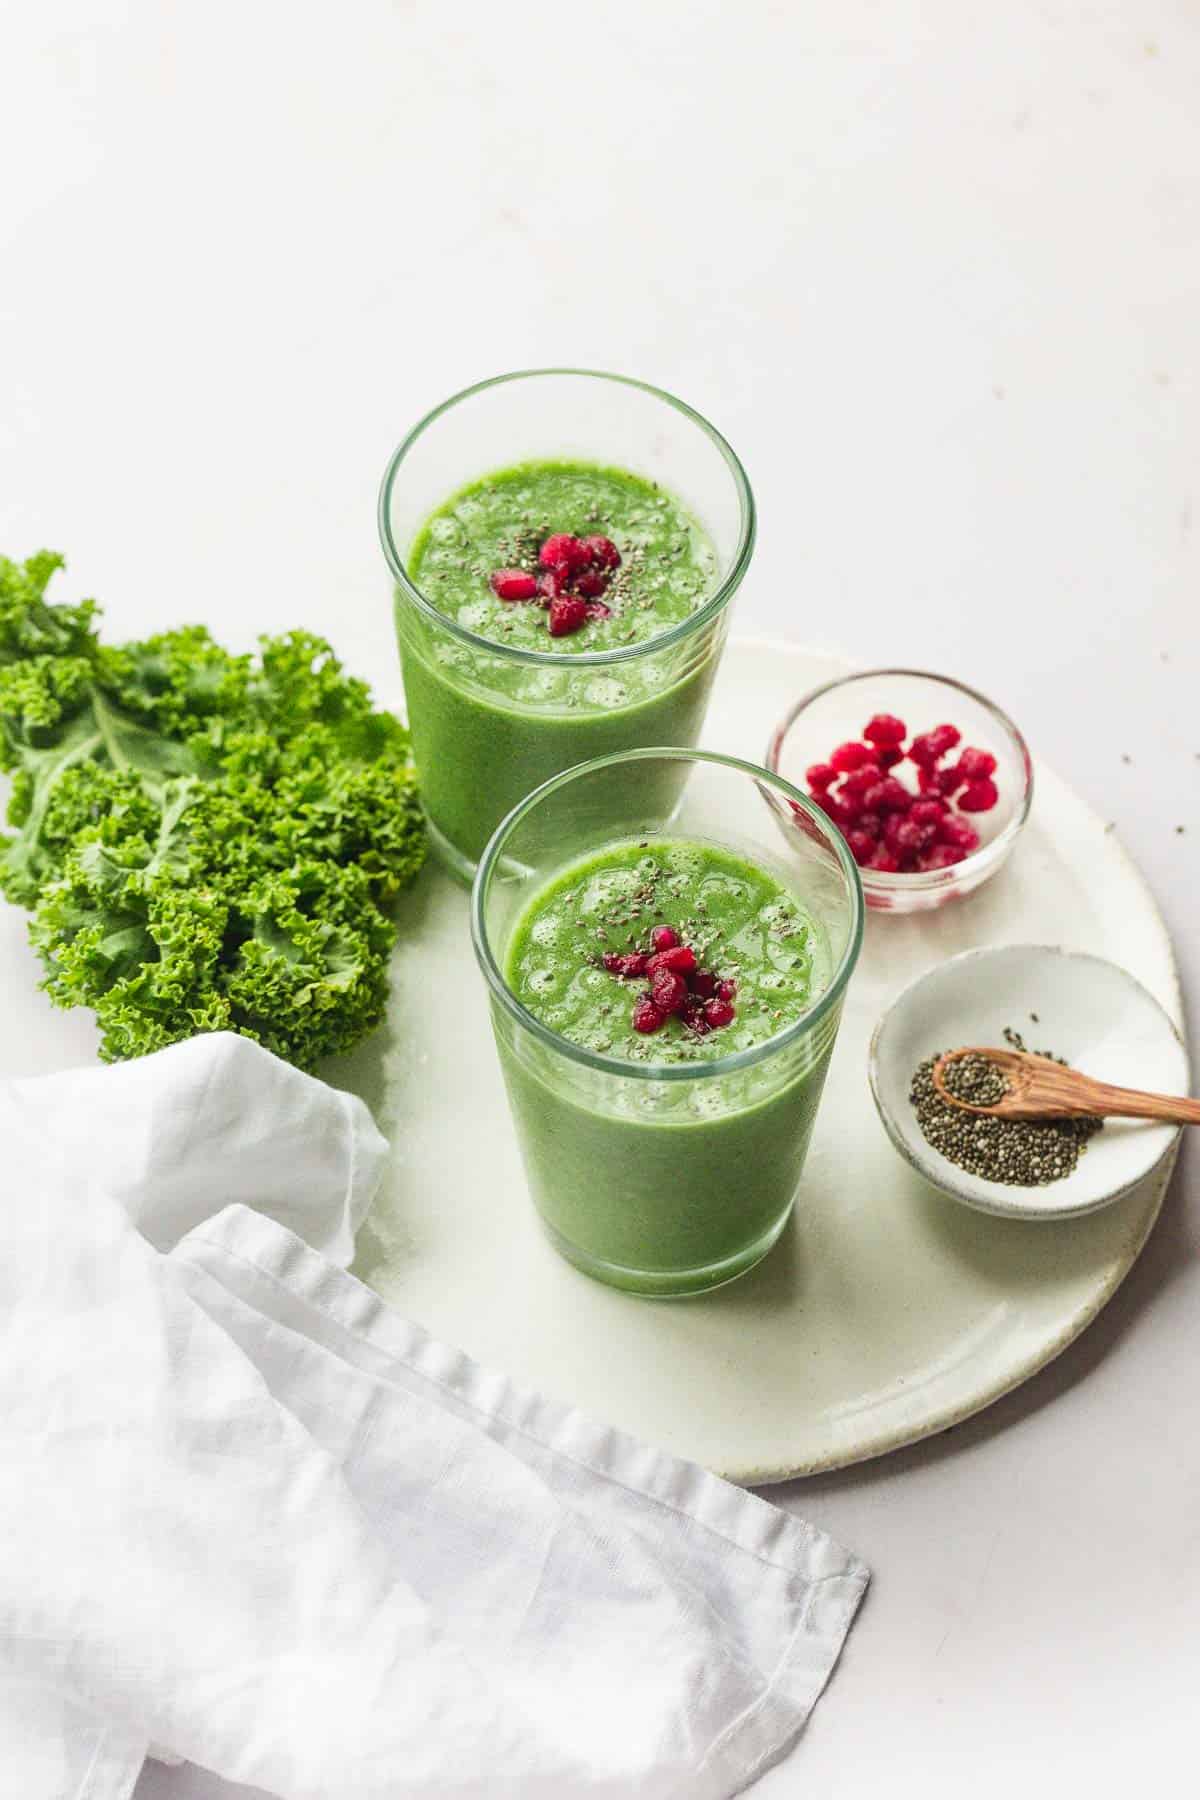 Glasses filled with green smoothie on a ceramic white tray